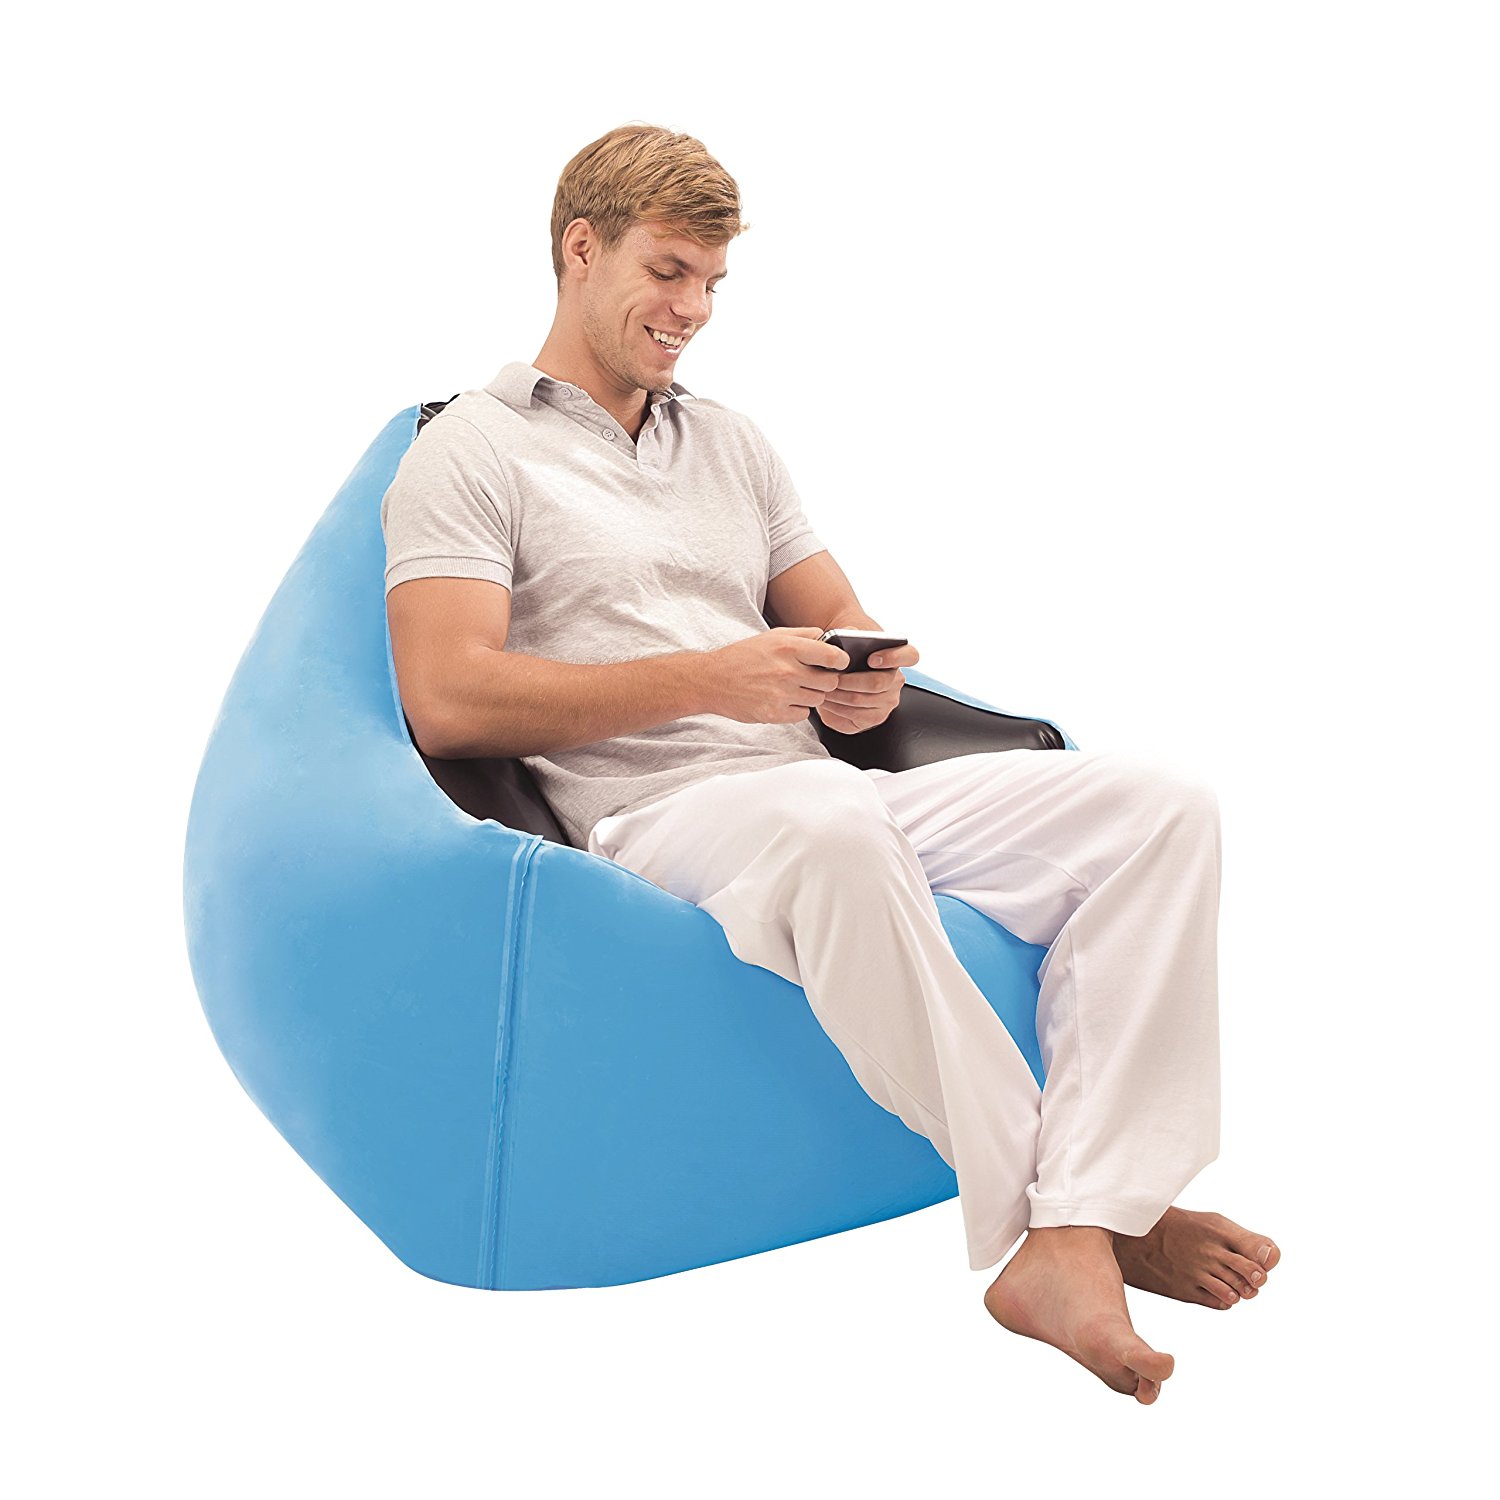 Bestway Moda Inflatable Chair, Blue